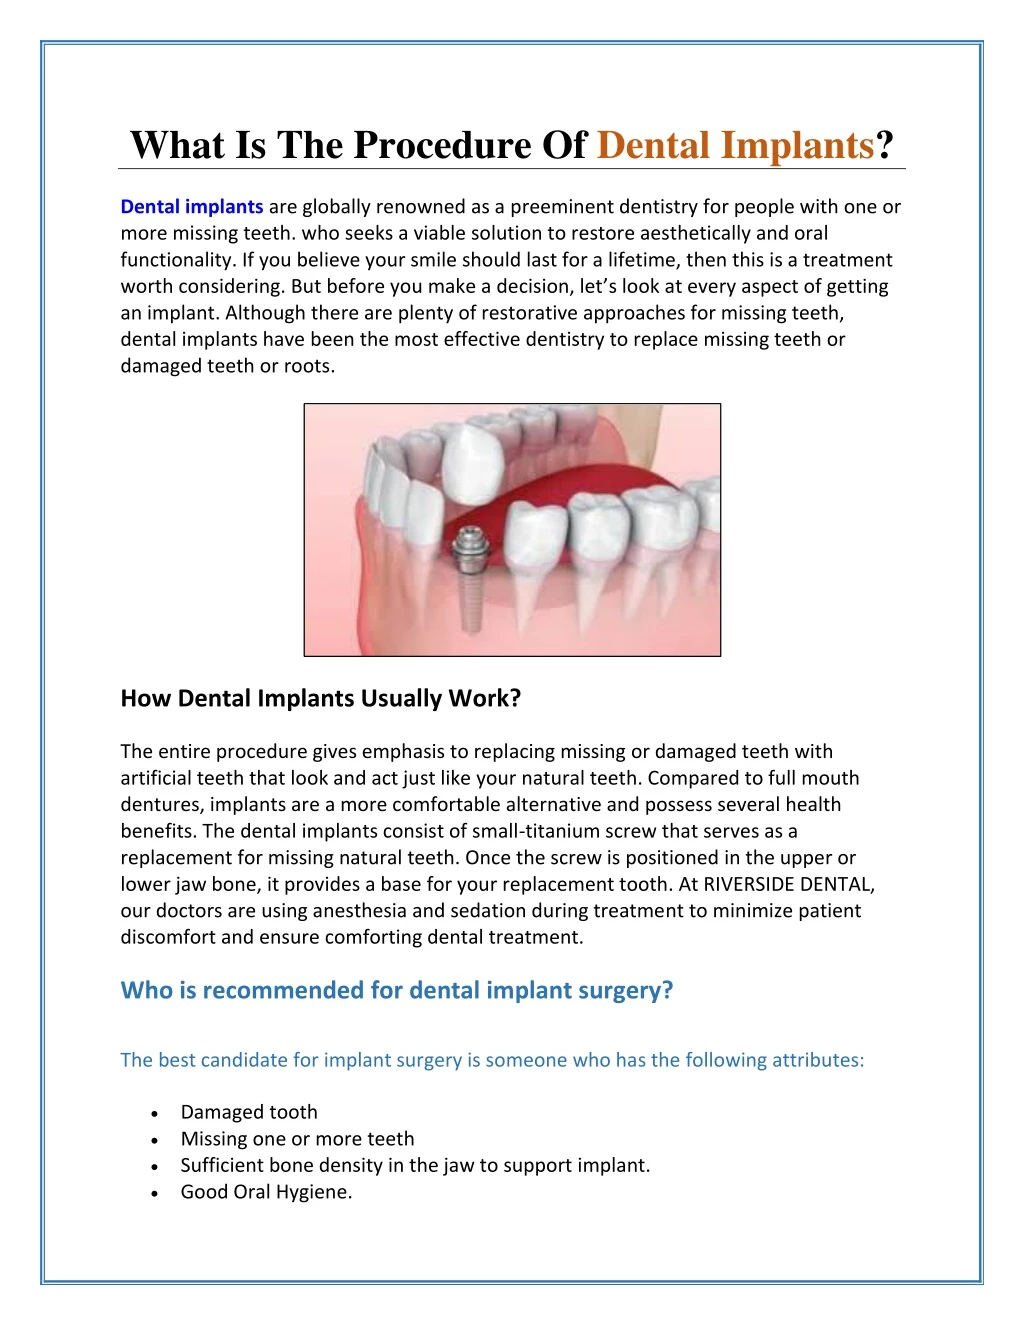 what is the procedure of dental implants